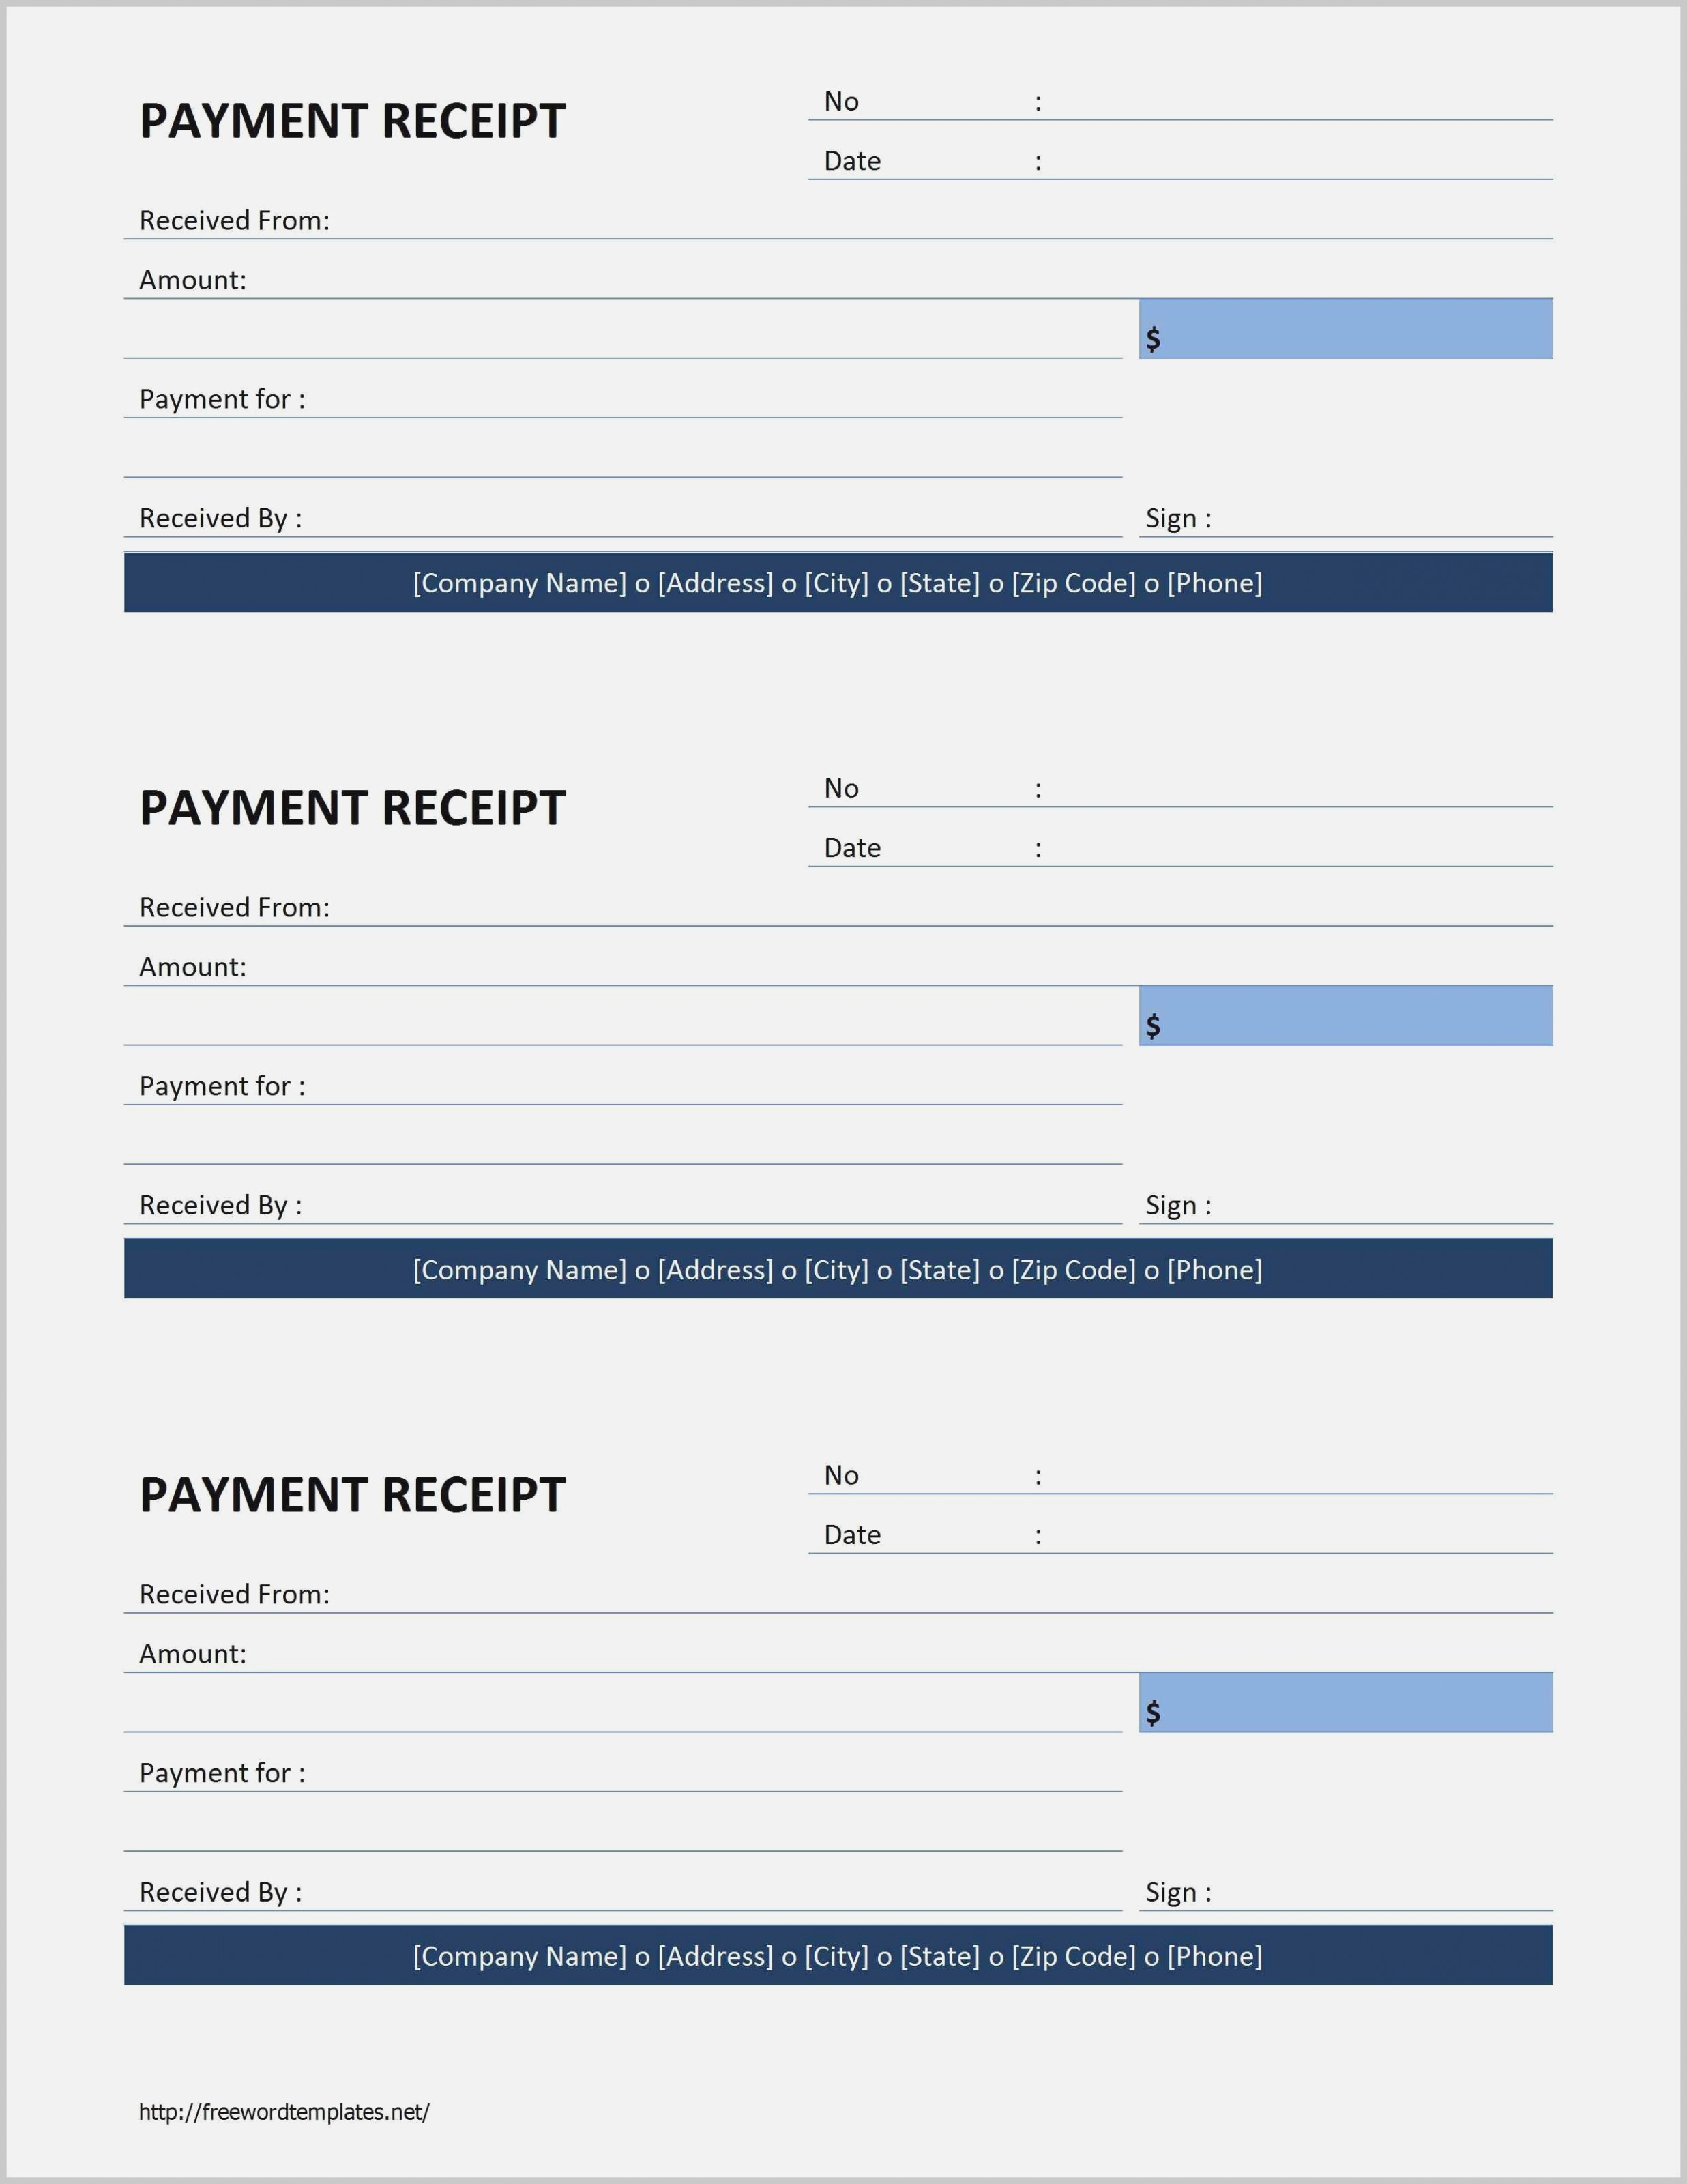 The Death Of Free | Realty Executives Mi : Invoice And Resume - Free Printable Daycare Receipts